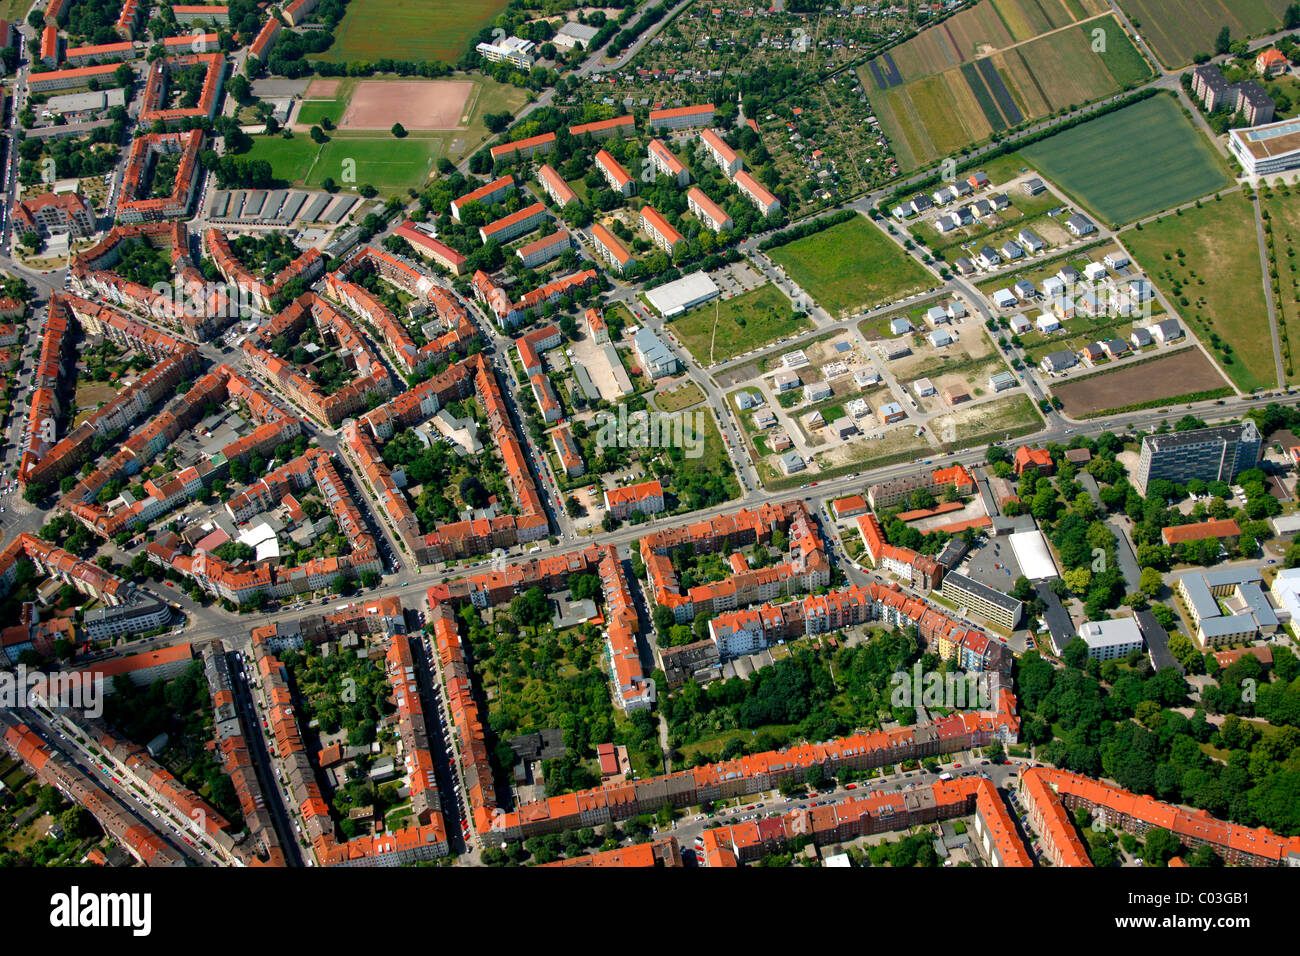 Aerial view, Magdeburger Allee street, Erfurt, Thuringia, Germany, Europe Stock Photo